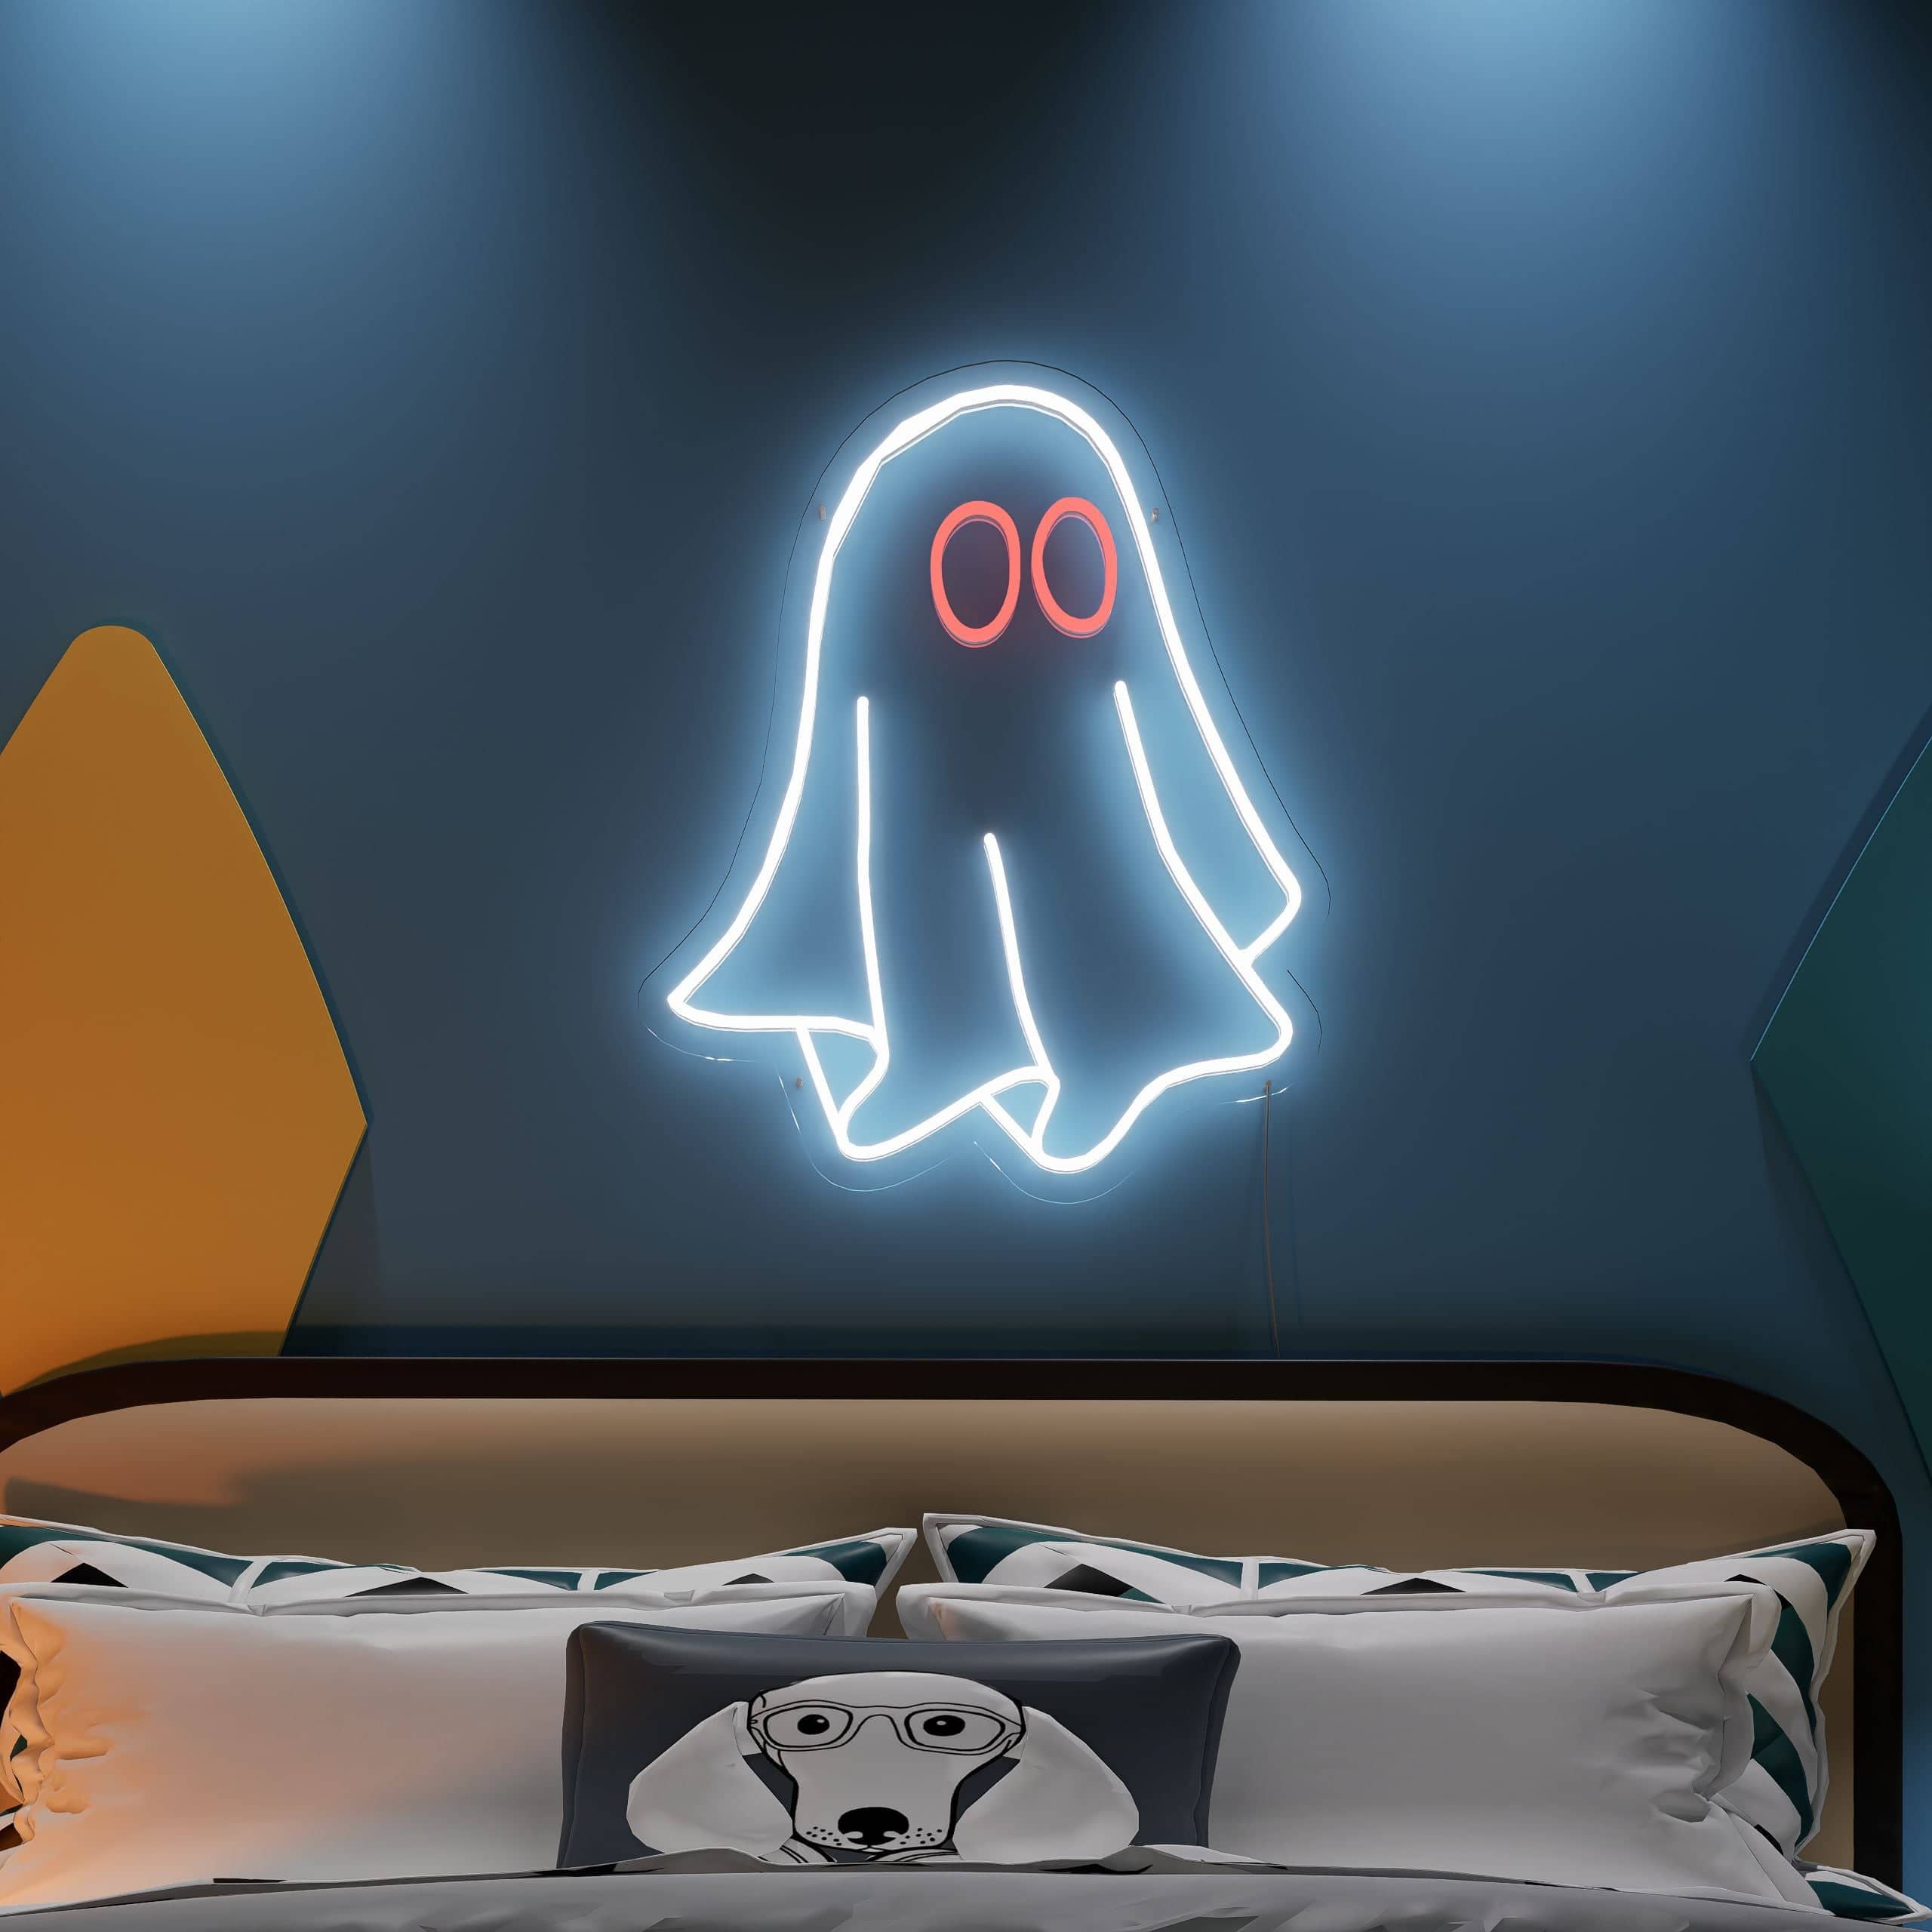 Add a spooky touch with living room Neon Signs